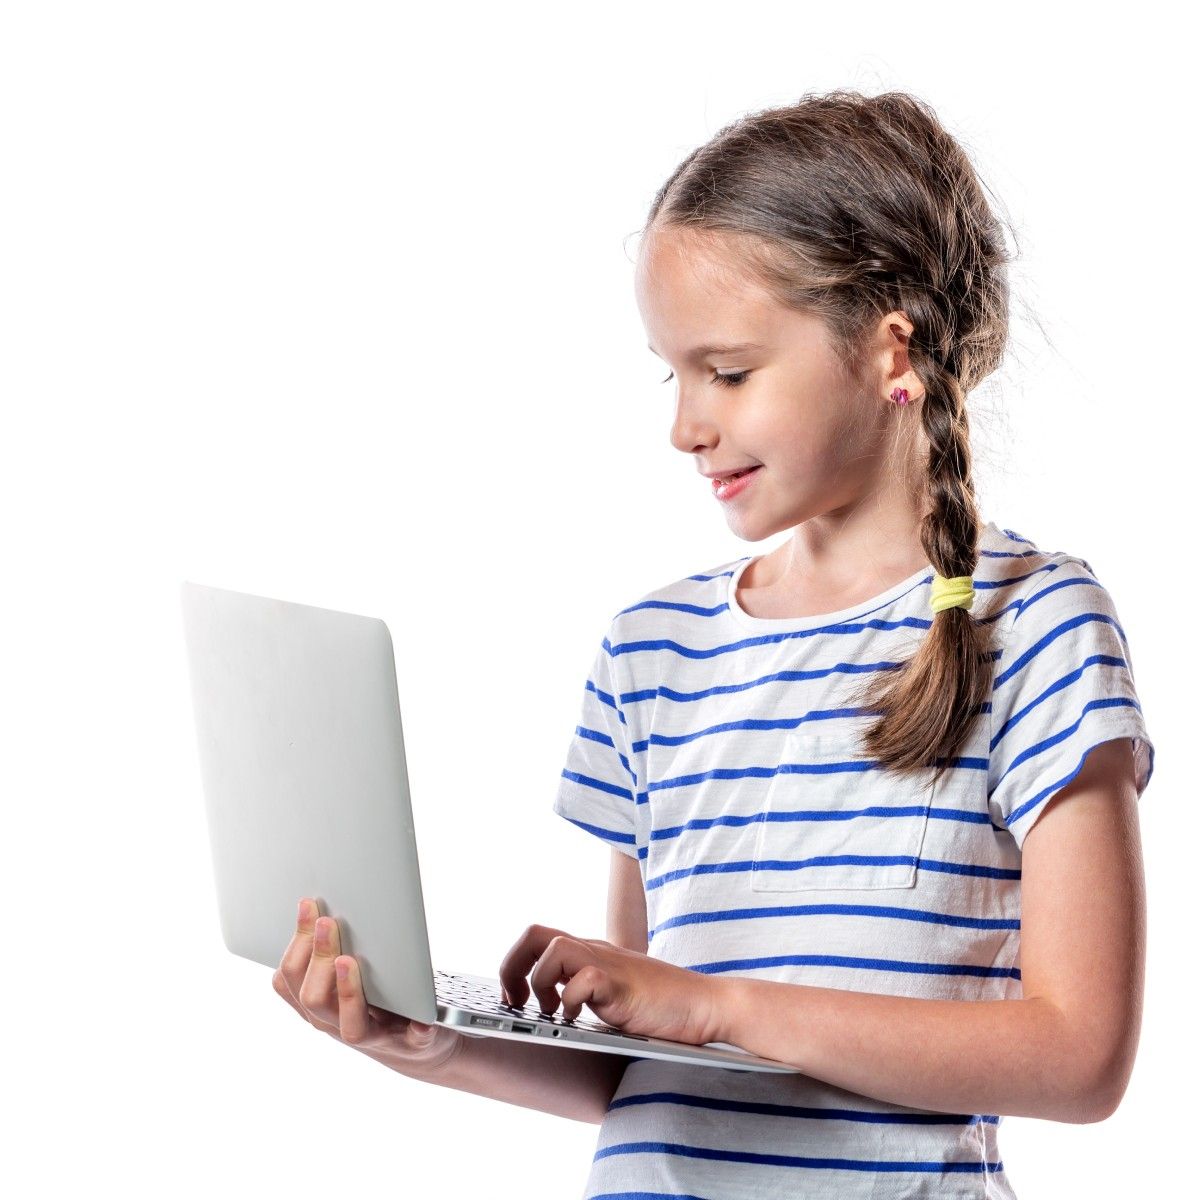 A young, blonde-haired girl stands holding a silver laptop to represent young children using the internet and social media